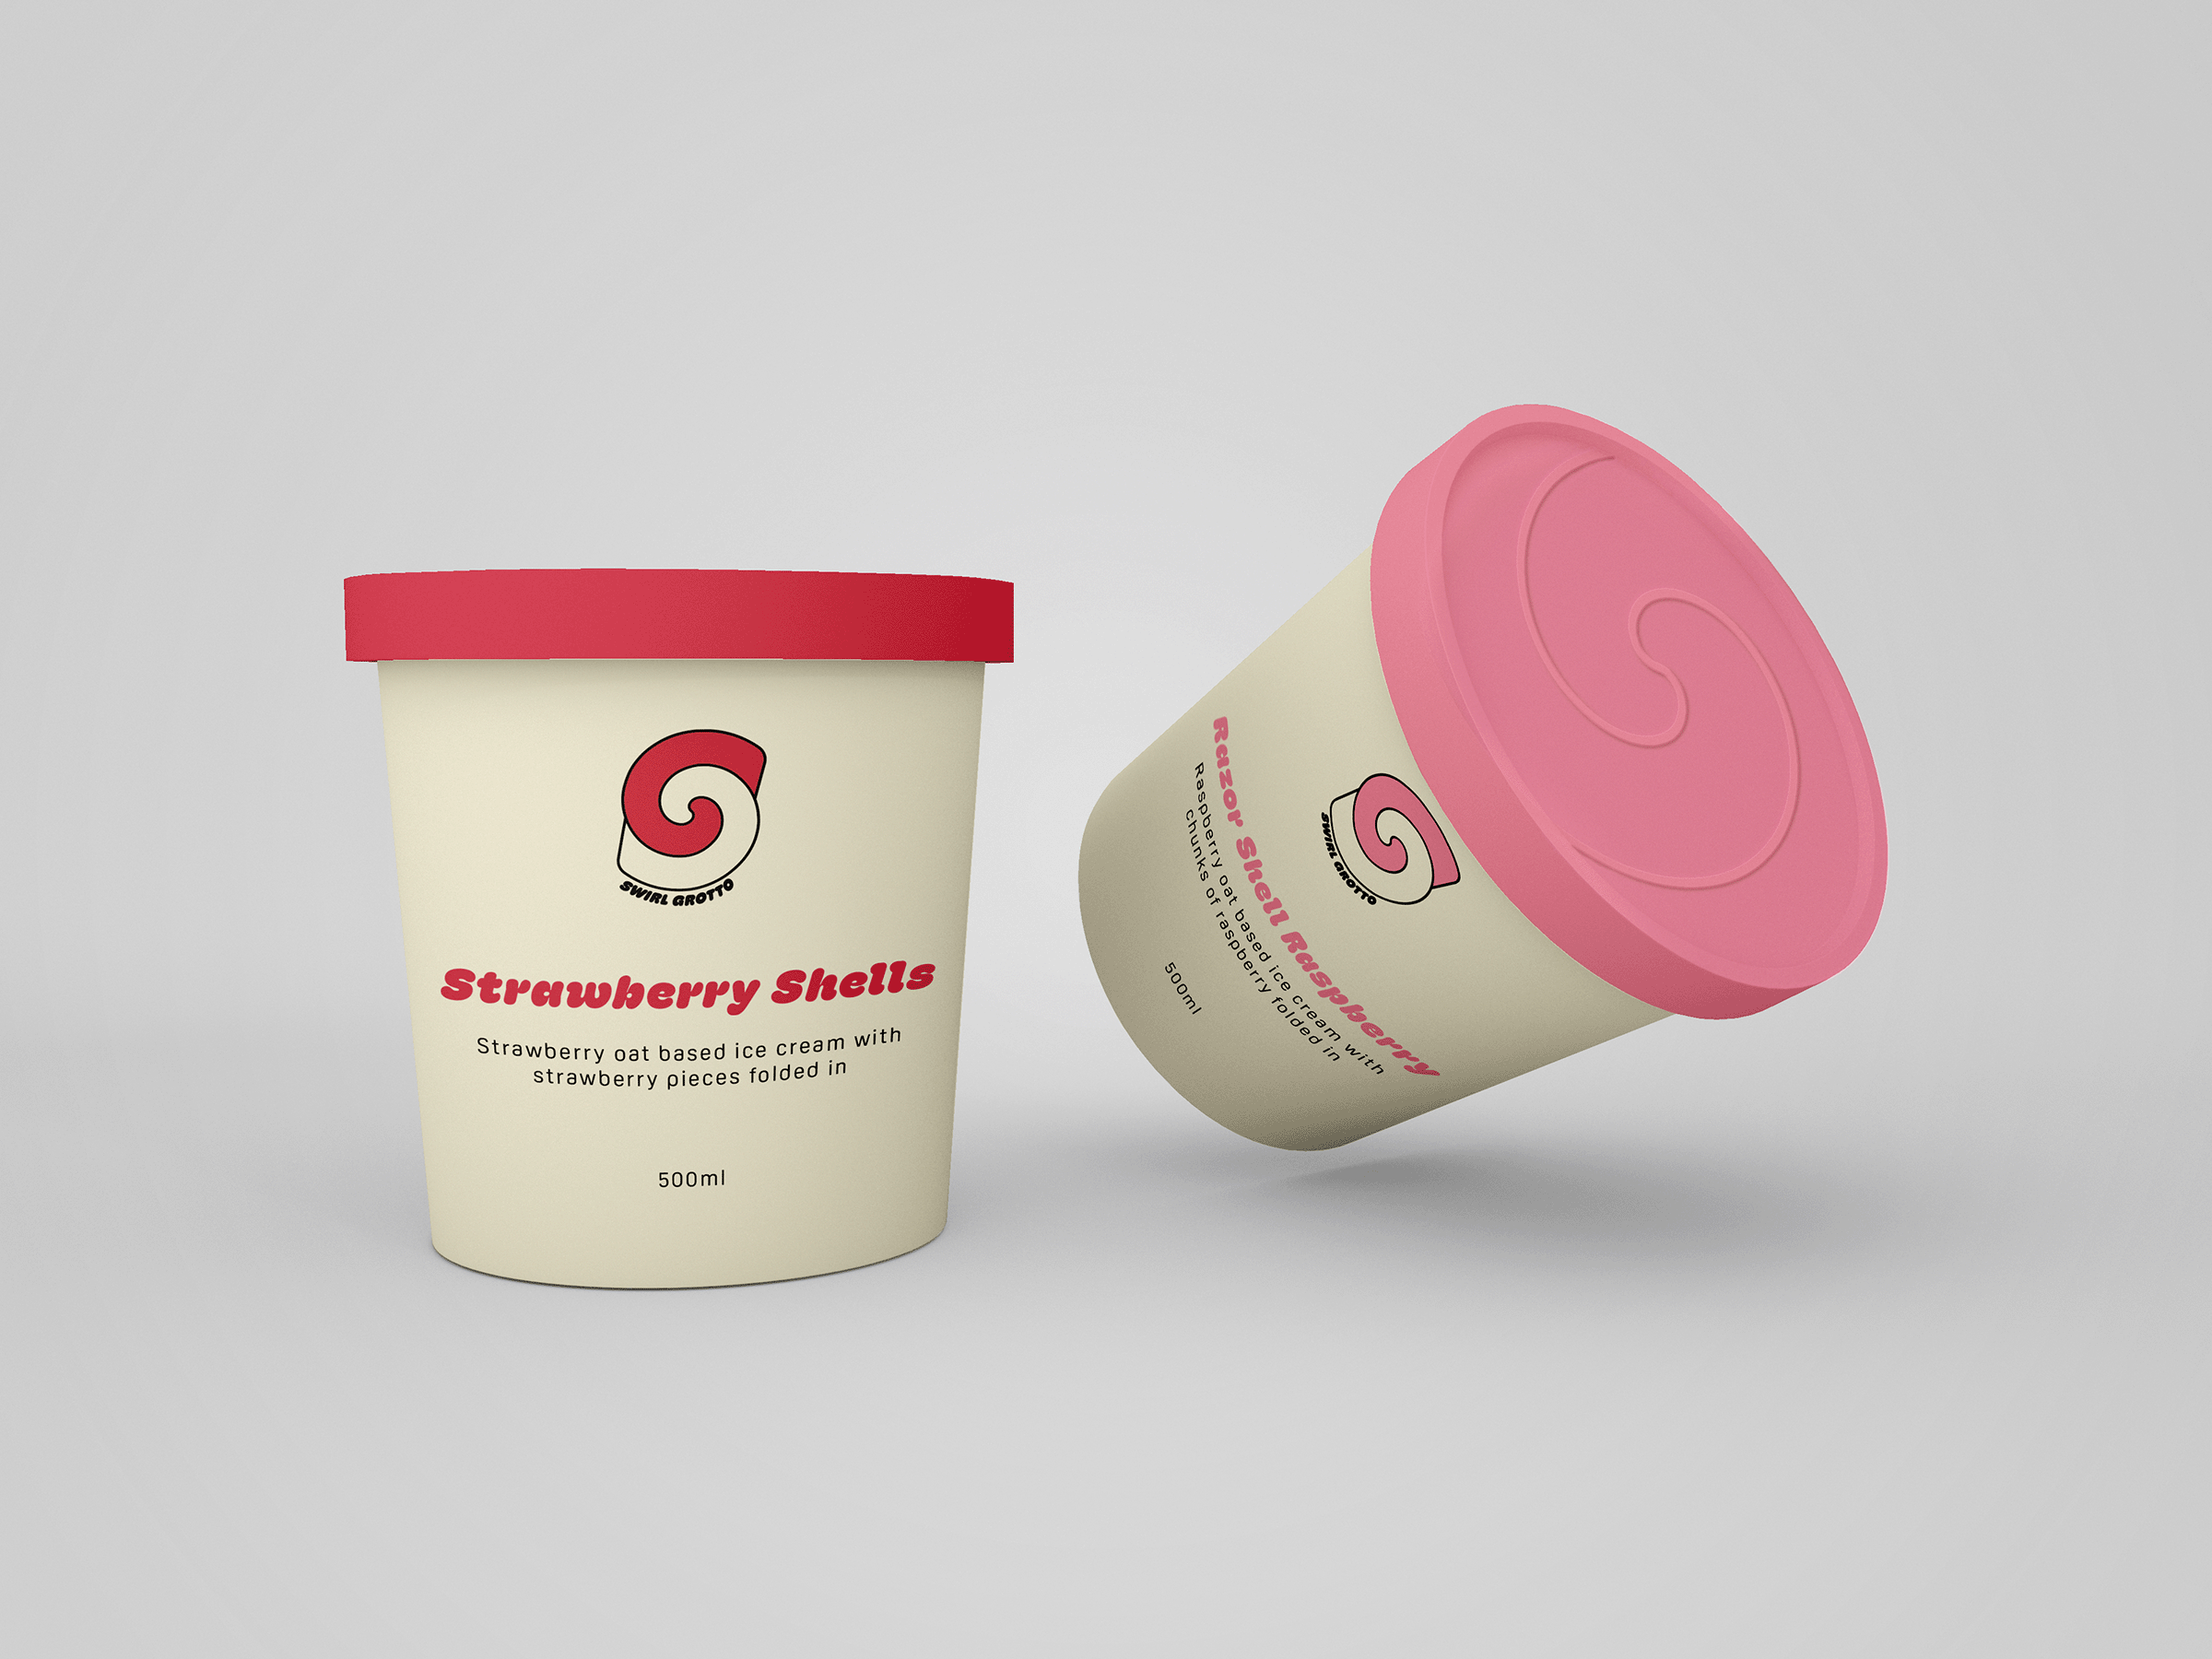 A prototype of two white ice cream tubs with pink embossed lids. Flavours shown are Razor shell raspberry and Strawberry shells.